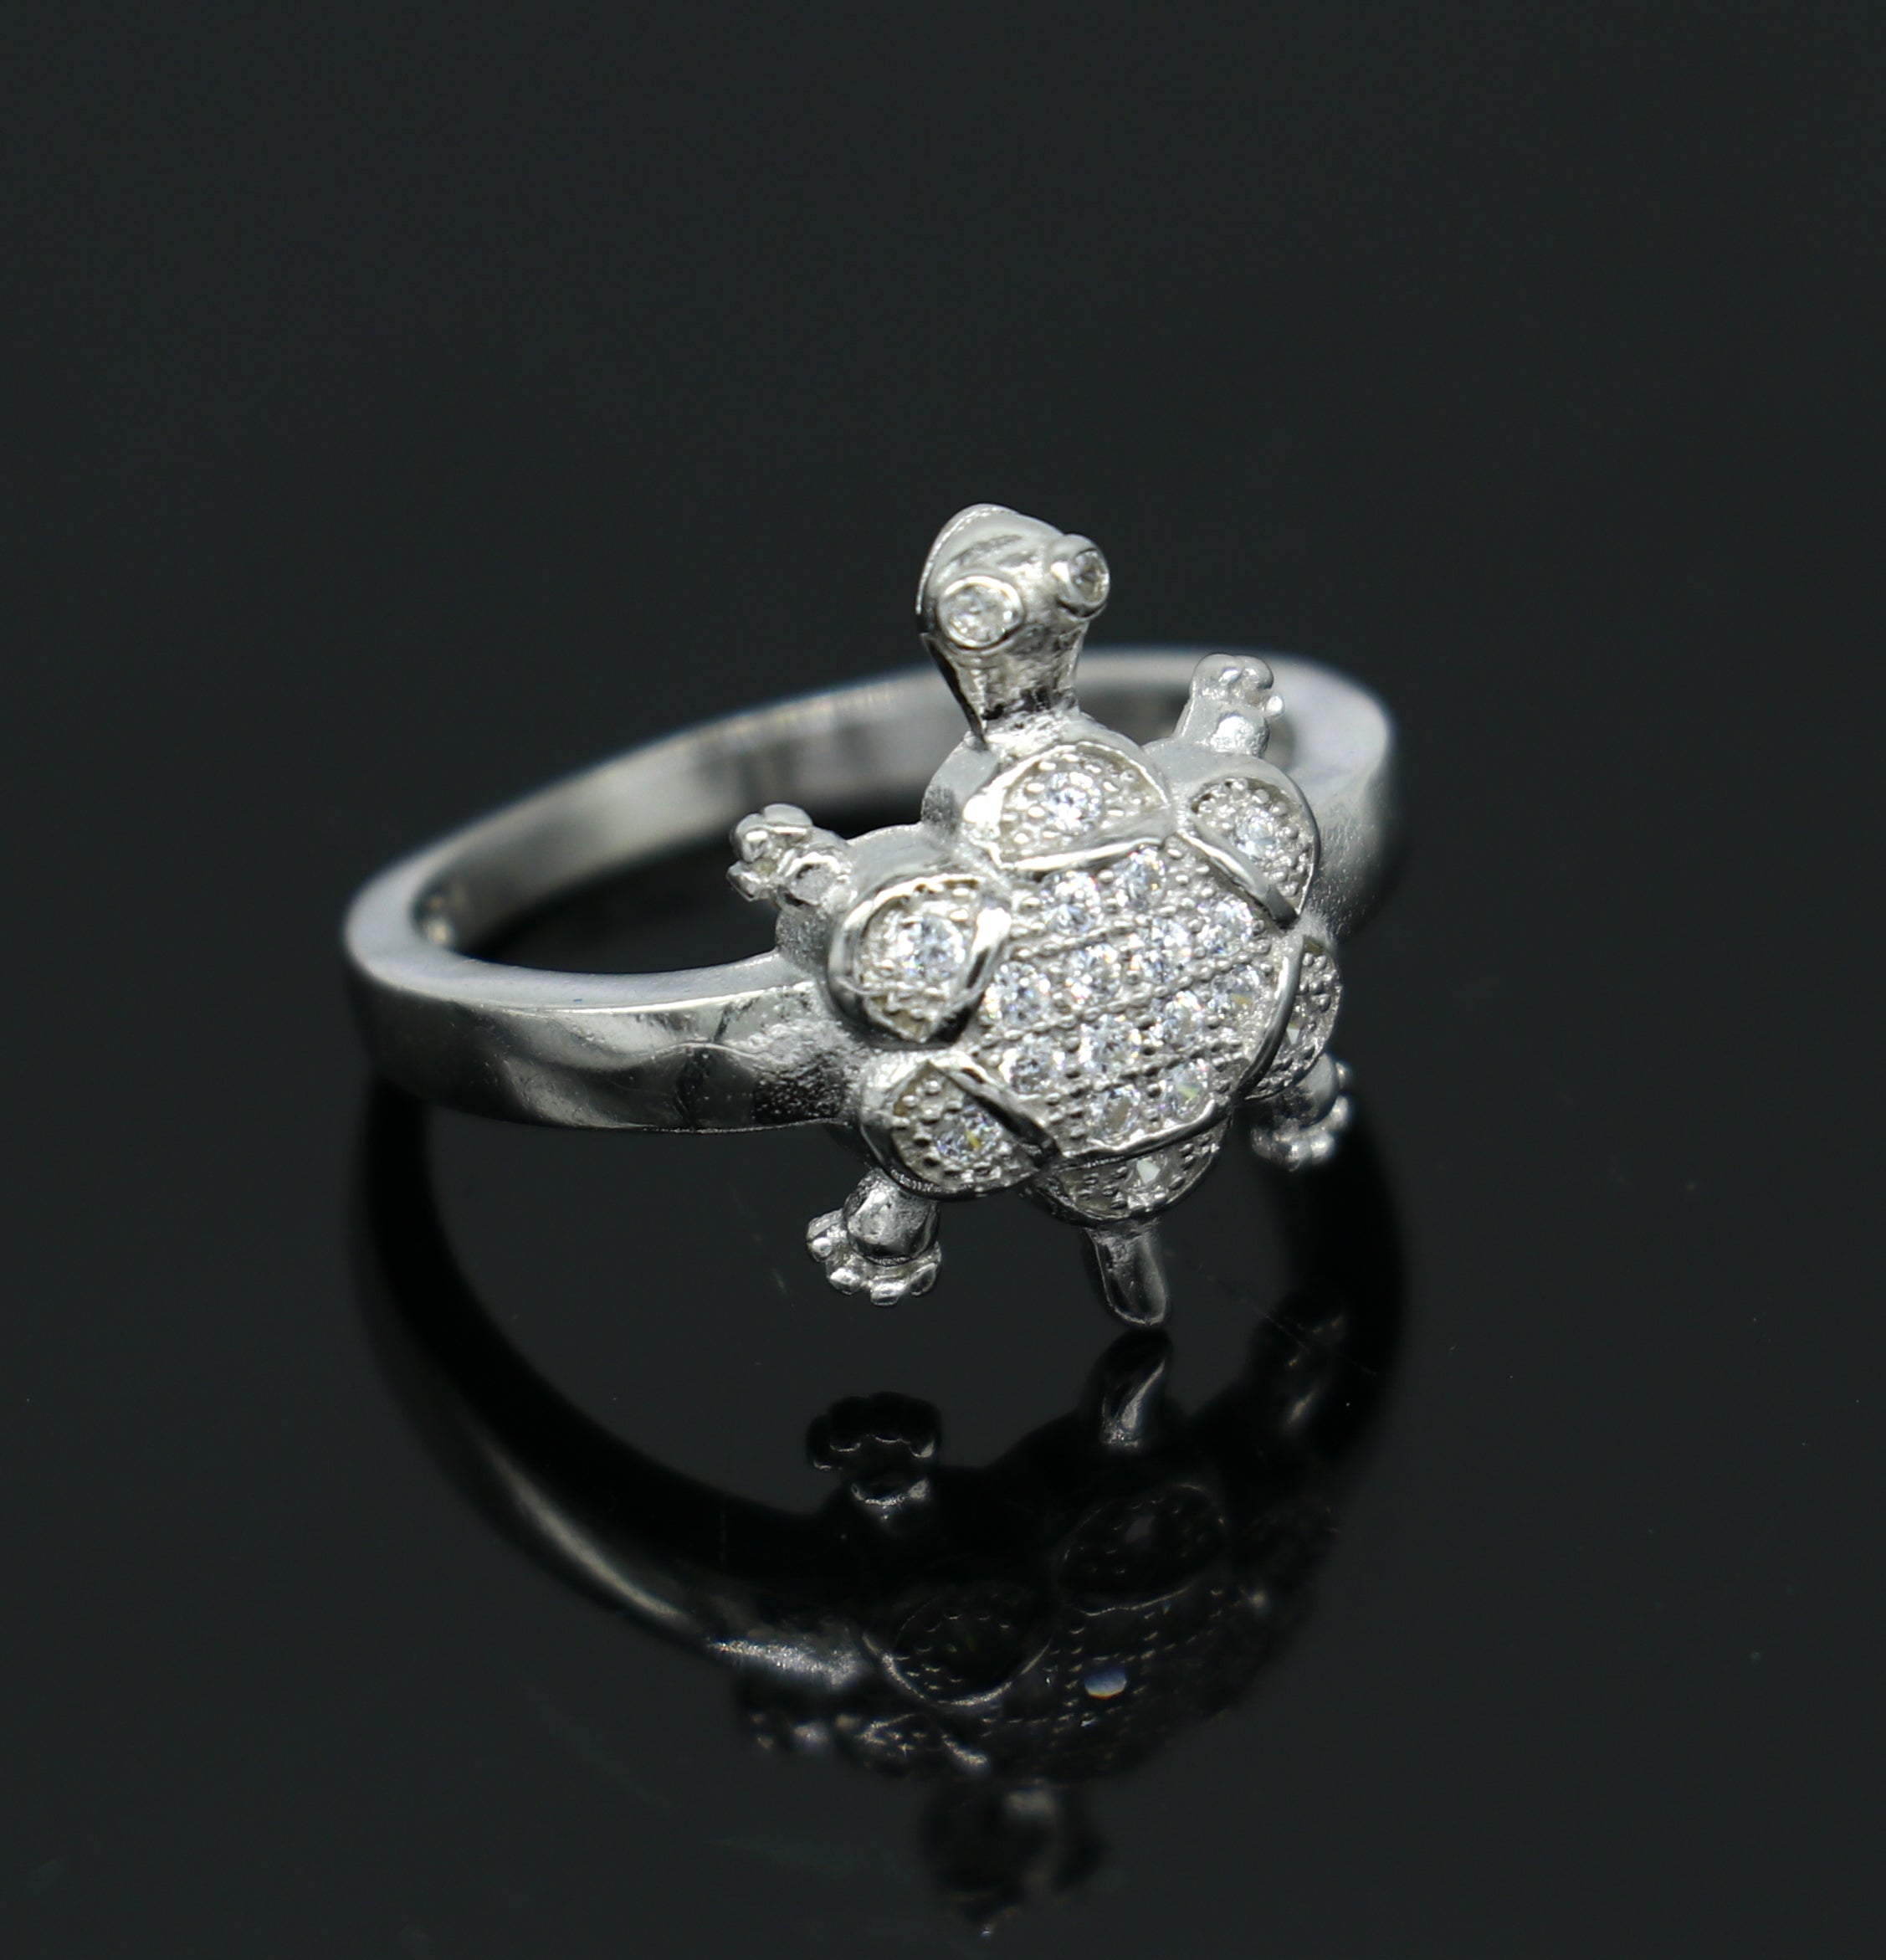 Amazon.com: Bling Jewelry Nautical Hawaii Vacation Honeymoon Sea Turtle Ring  Band For Women Oxidized .925 Sterling Silver Split Shank Ring: Clothing,  Shoes & Jewelry